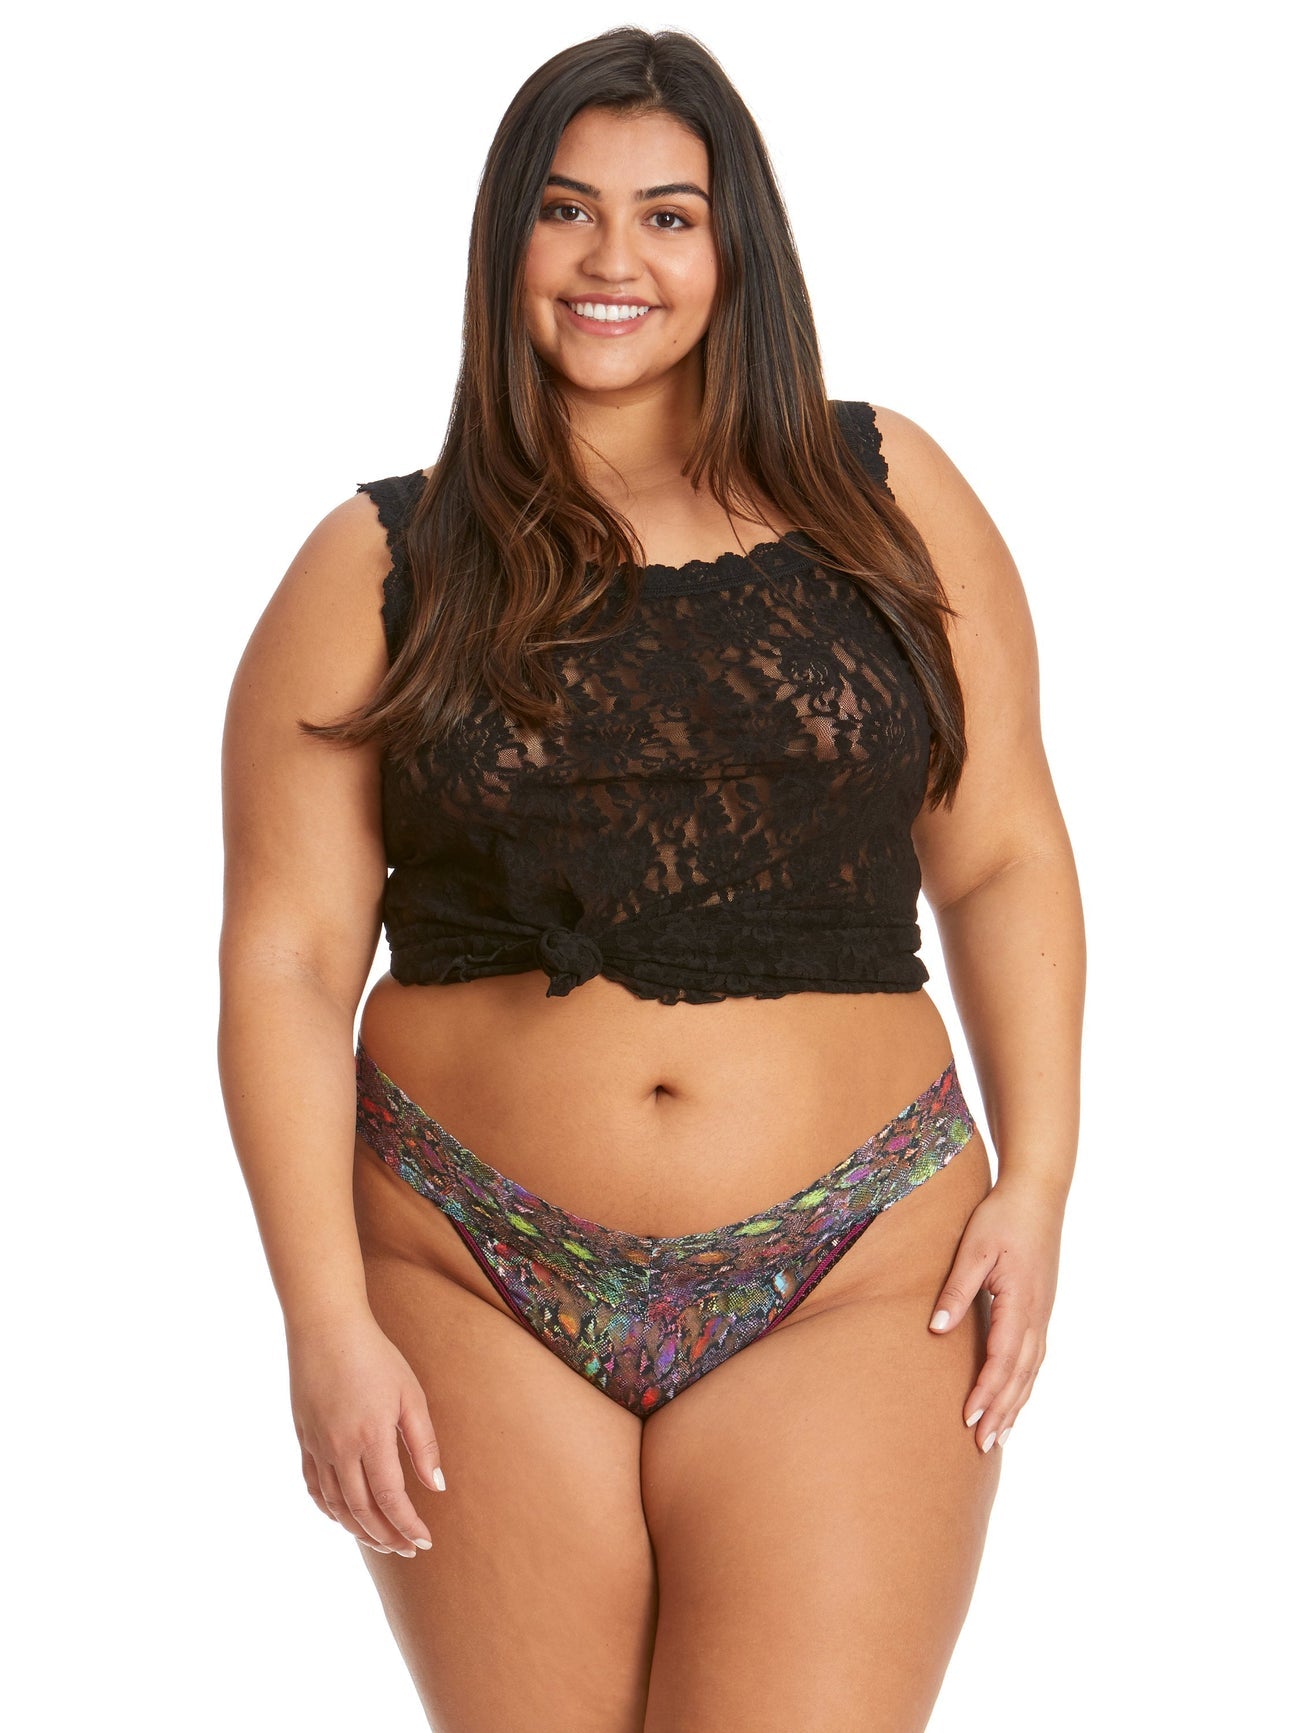 Plus Size Hanky Panky Rainboa Original Signiture Lace Thong | Intimates | Made in the USA | Classy Cozy Cool Women’s Clothing Boutique